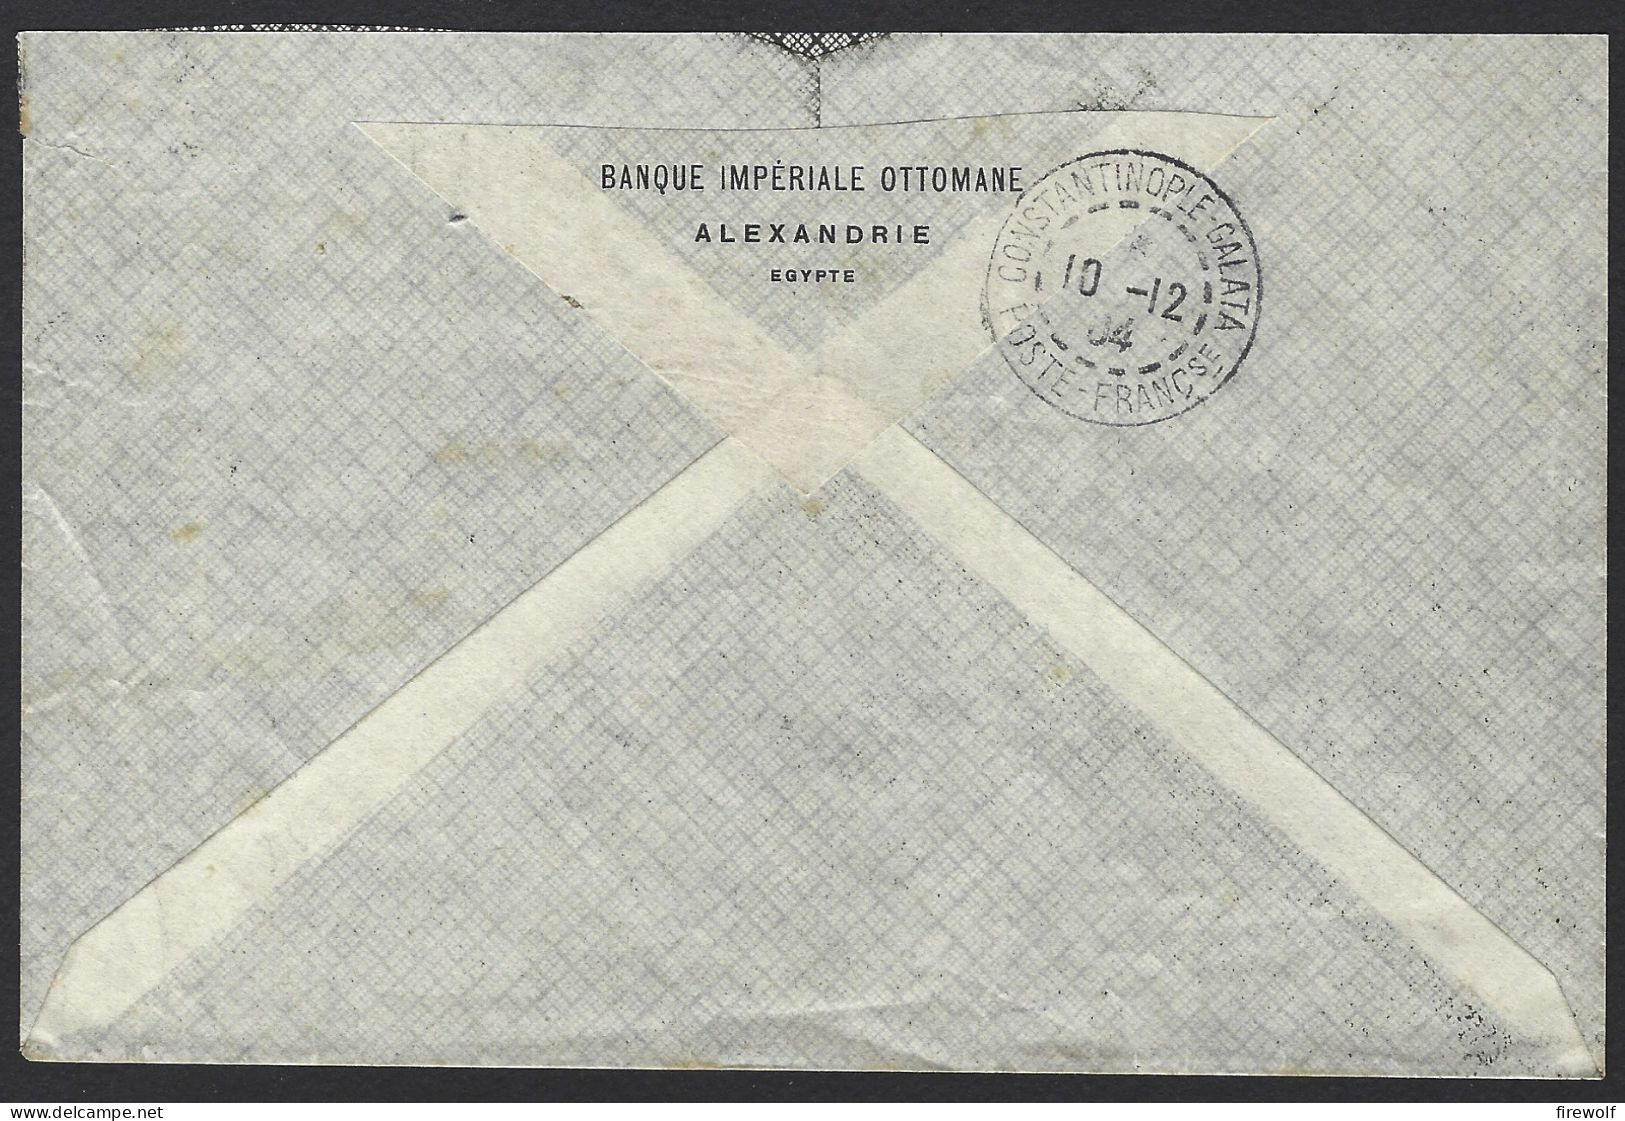 F05 - Egypt Alexandria - French Office - Registered Cover 1904 To Constantinopel - Banque Impériale Ottomane - Covers & Documents